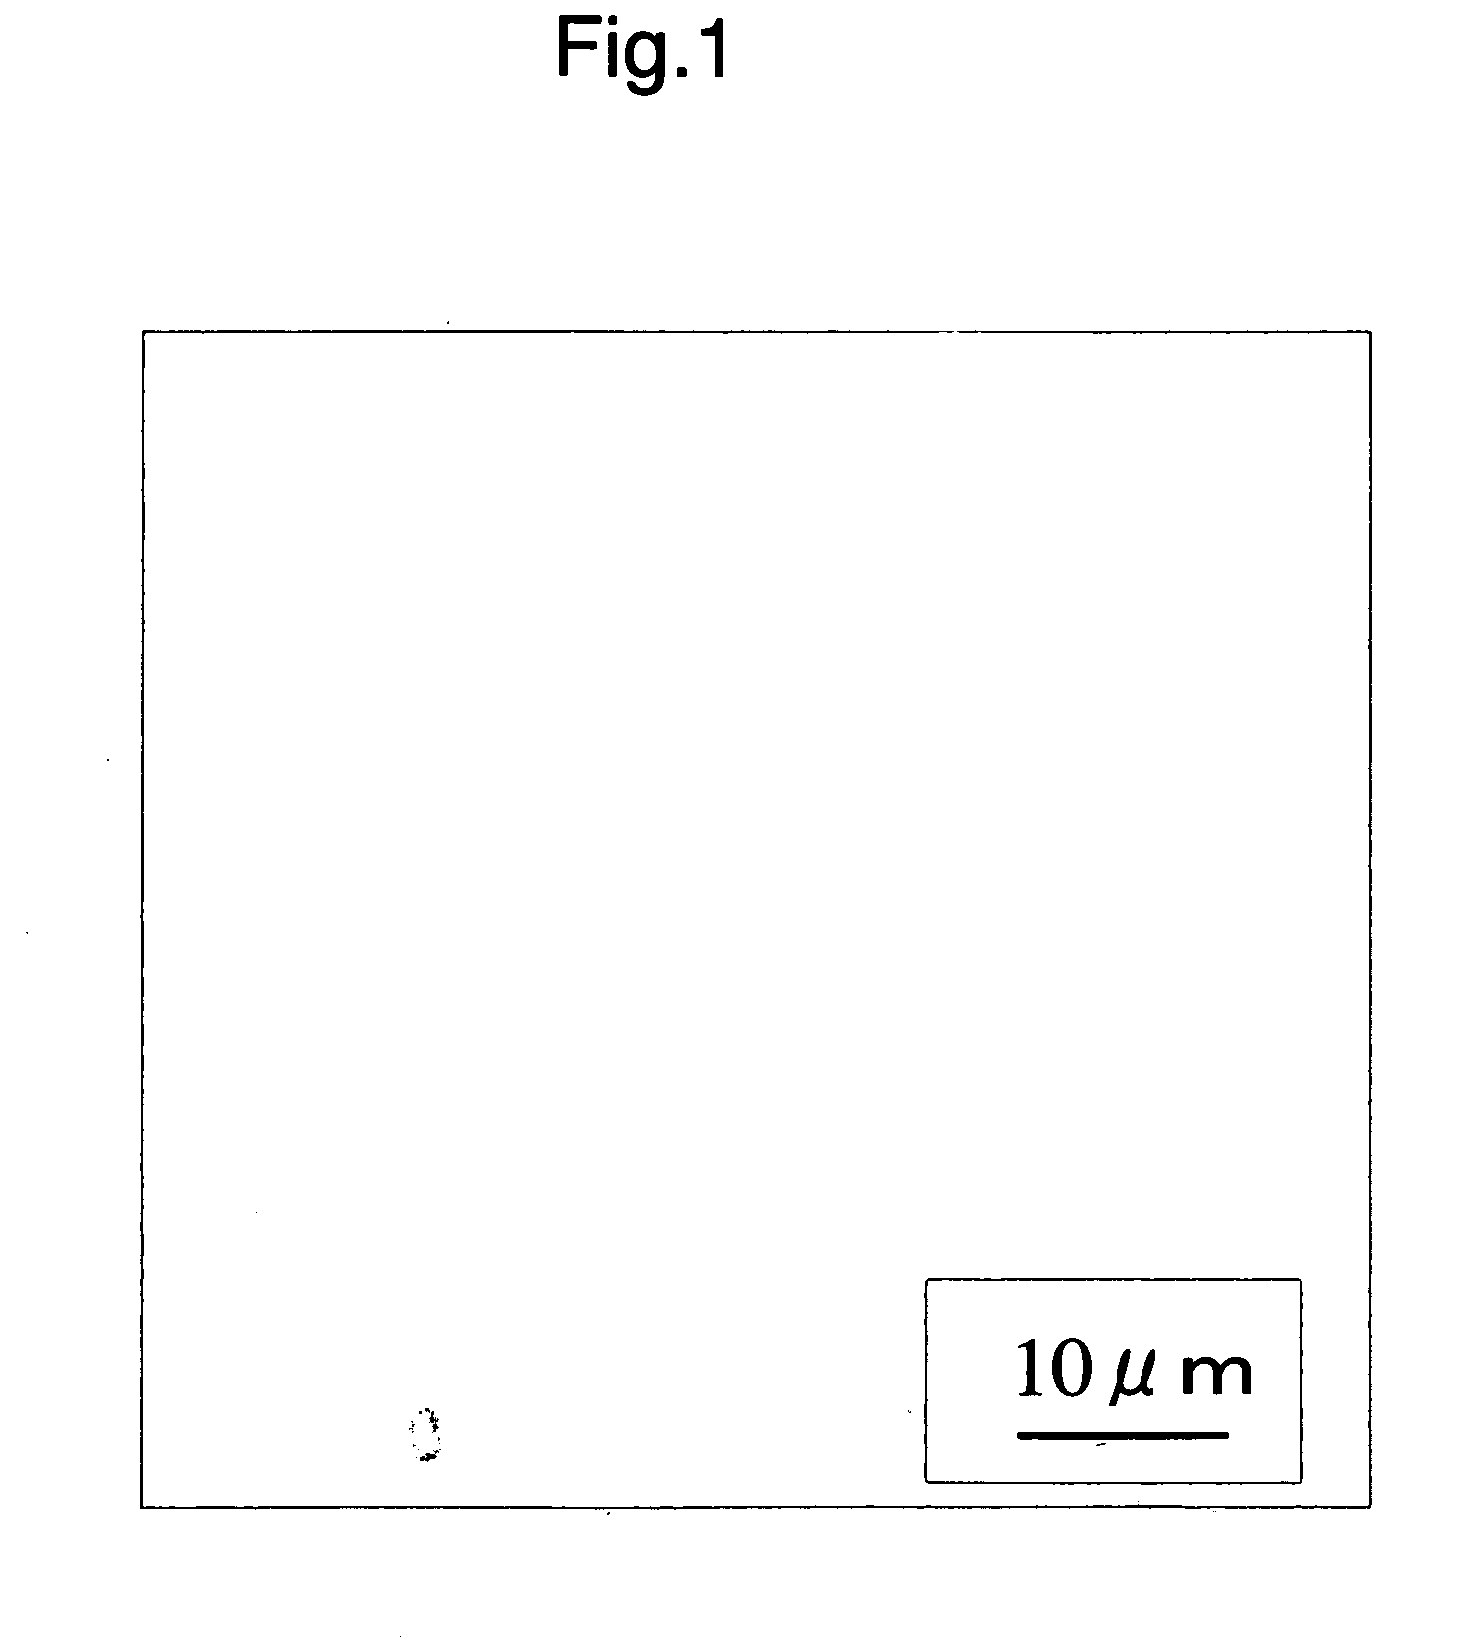 Polylactic acid resin composition, process for producing the same, biaxially stretched polylactic acid film, and molded articles thereof